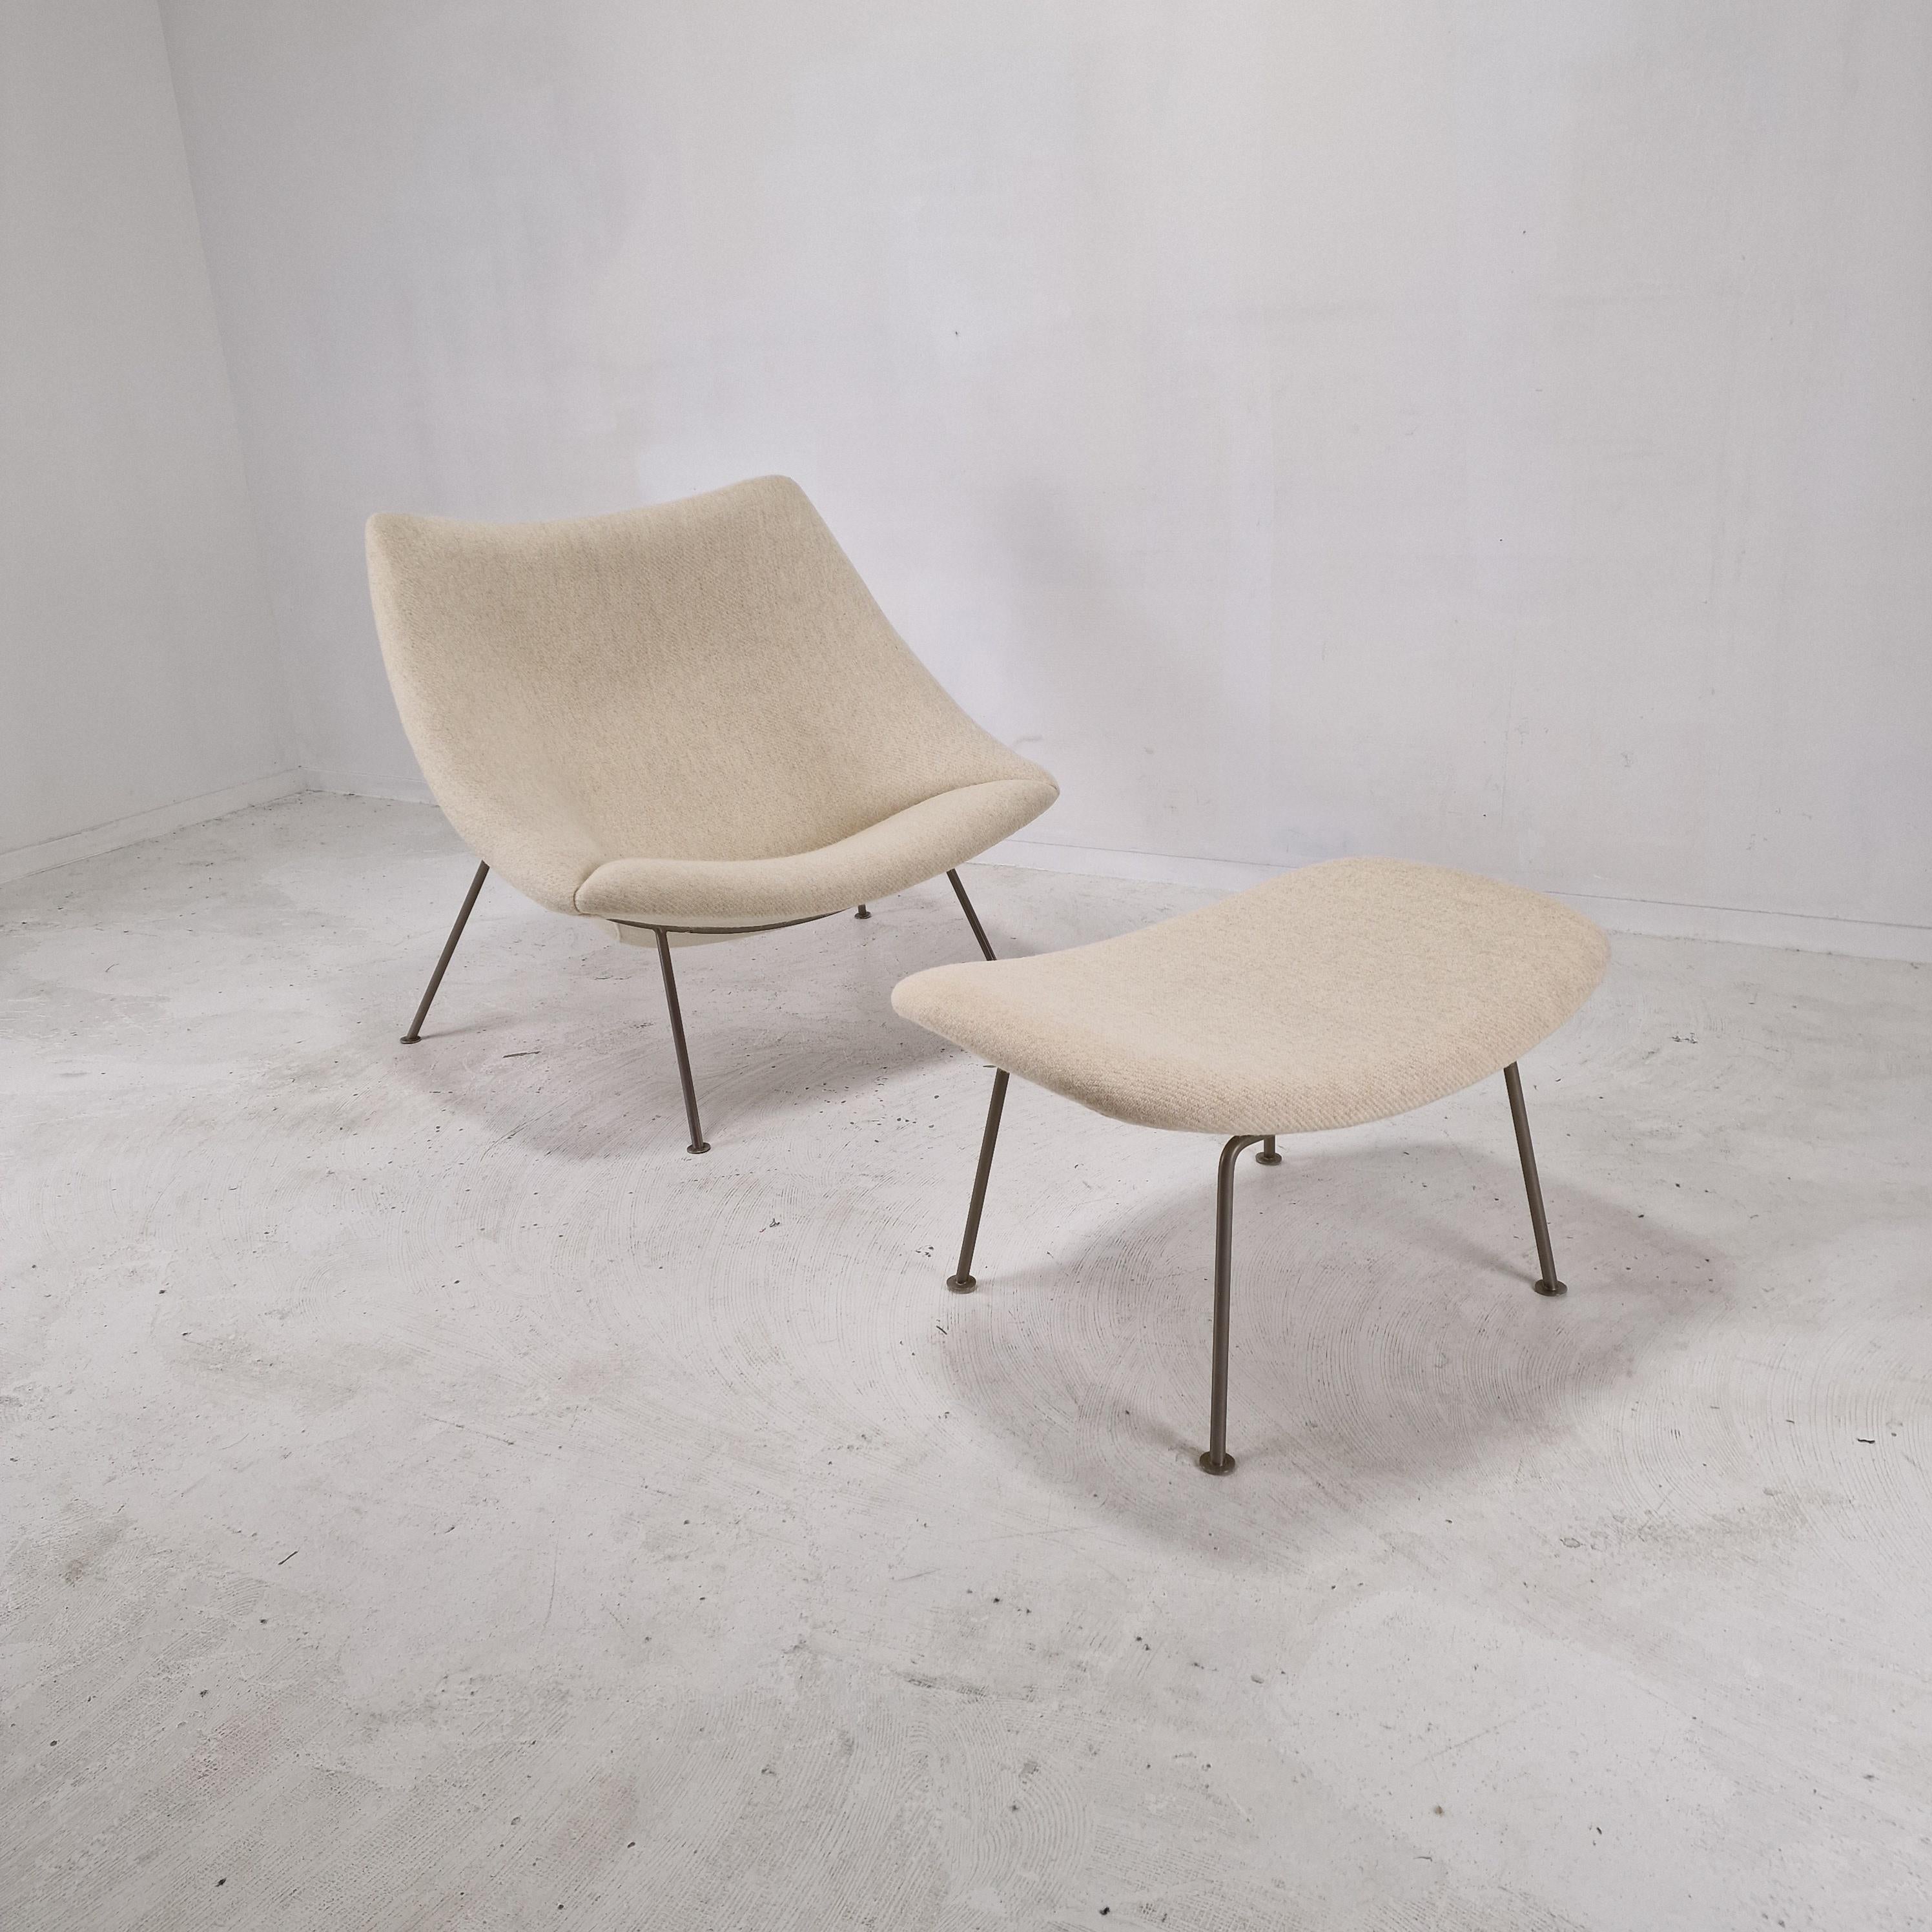 A beautiful set of the famous Artifort Oyster chair with a Ottoman.

This very comfortable chair is designed by Pierre Paulin in the beginning of the 60s.
This particular set is also manufactured in the 60s, with nickel metal legs.

The lovely